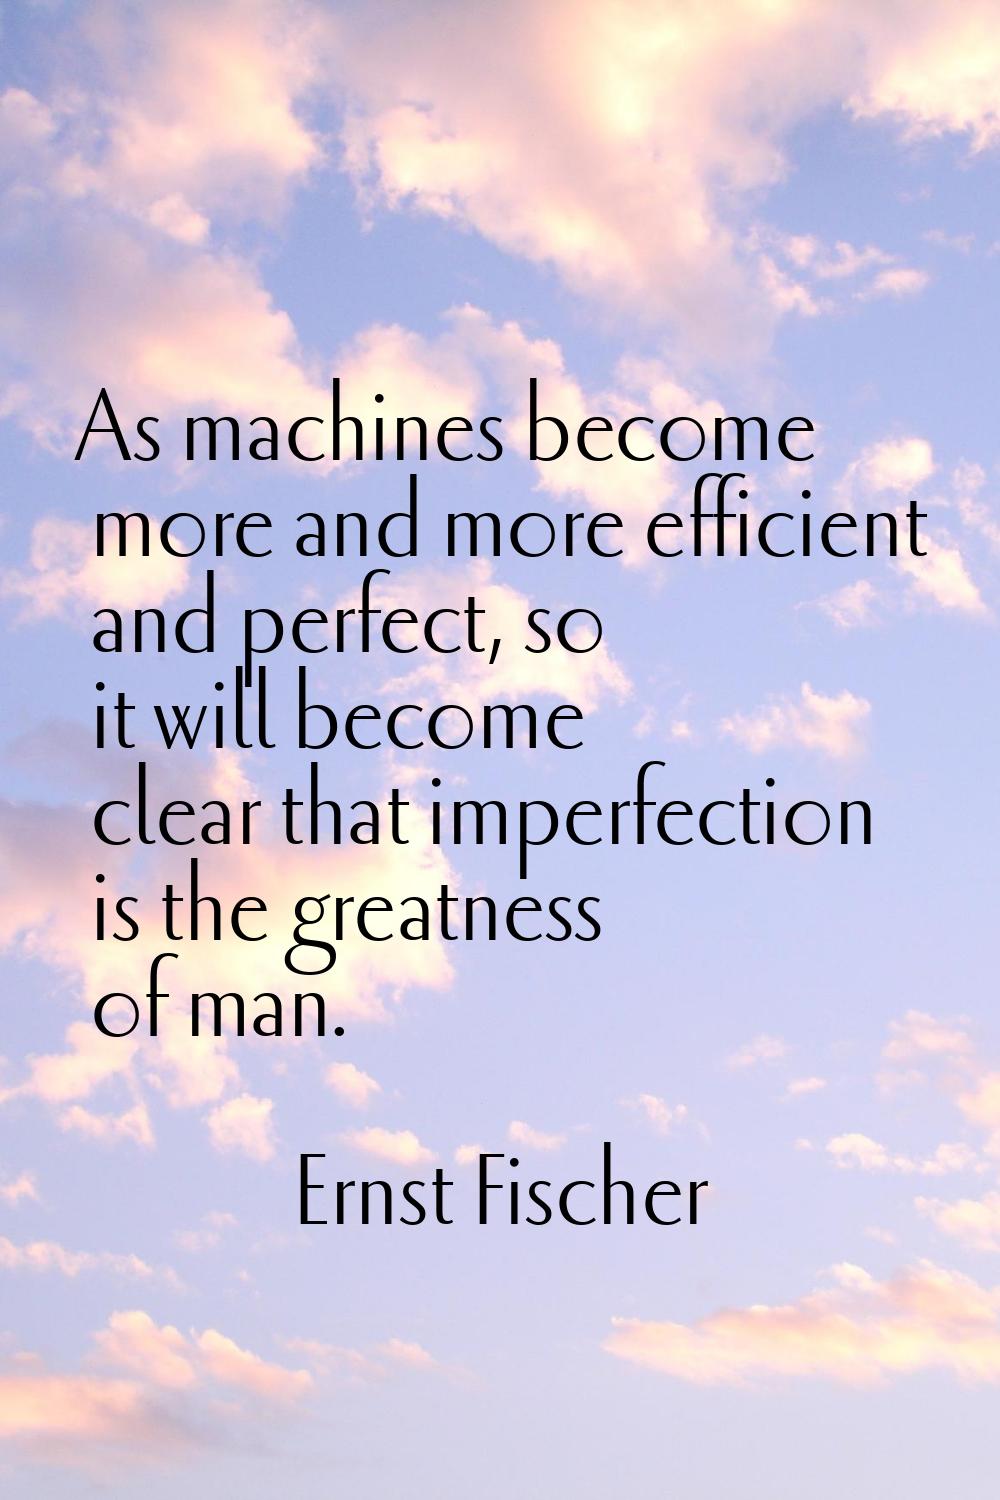 As machines become more and more efficient and perfect, so it will become clear that imperfection i